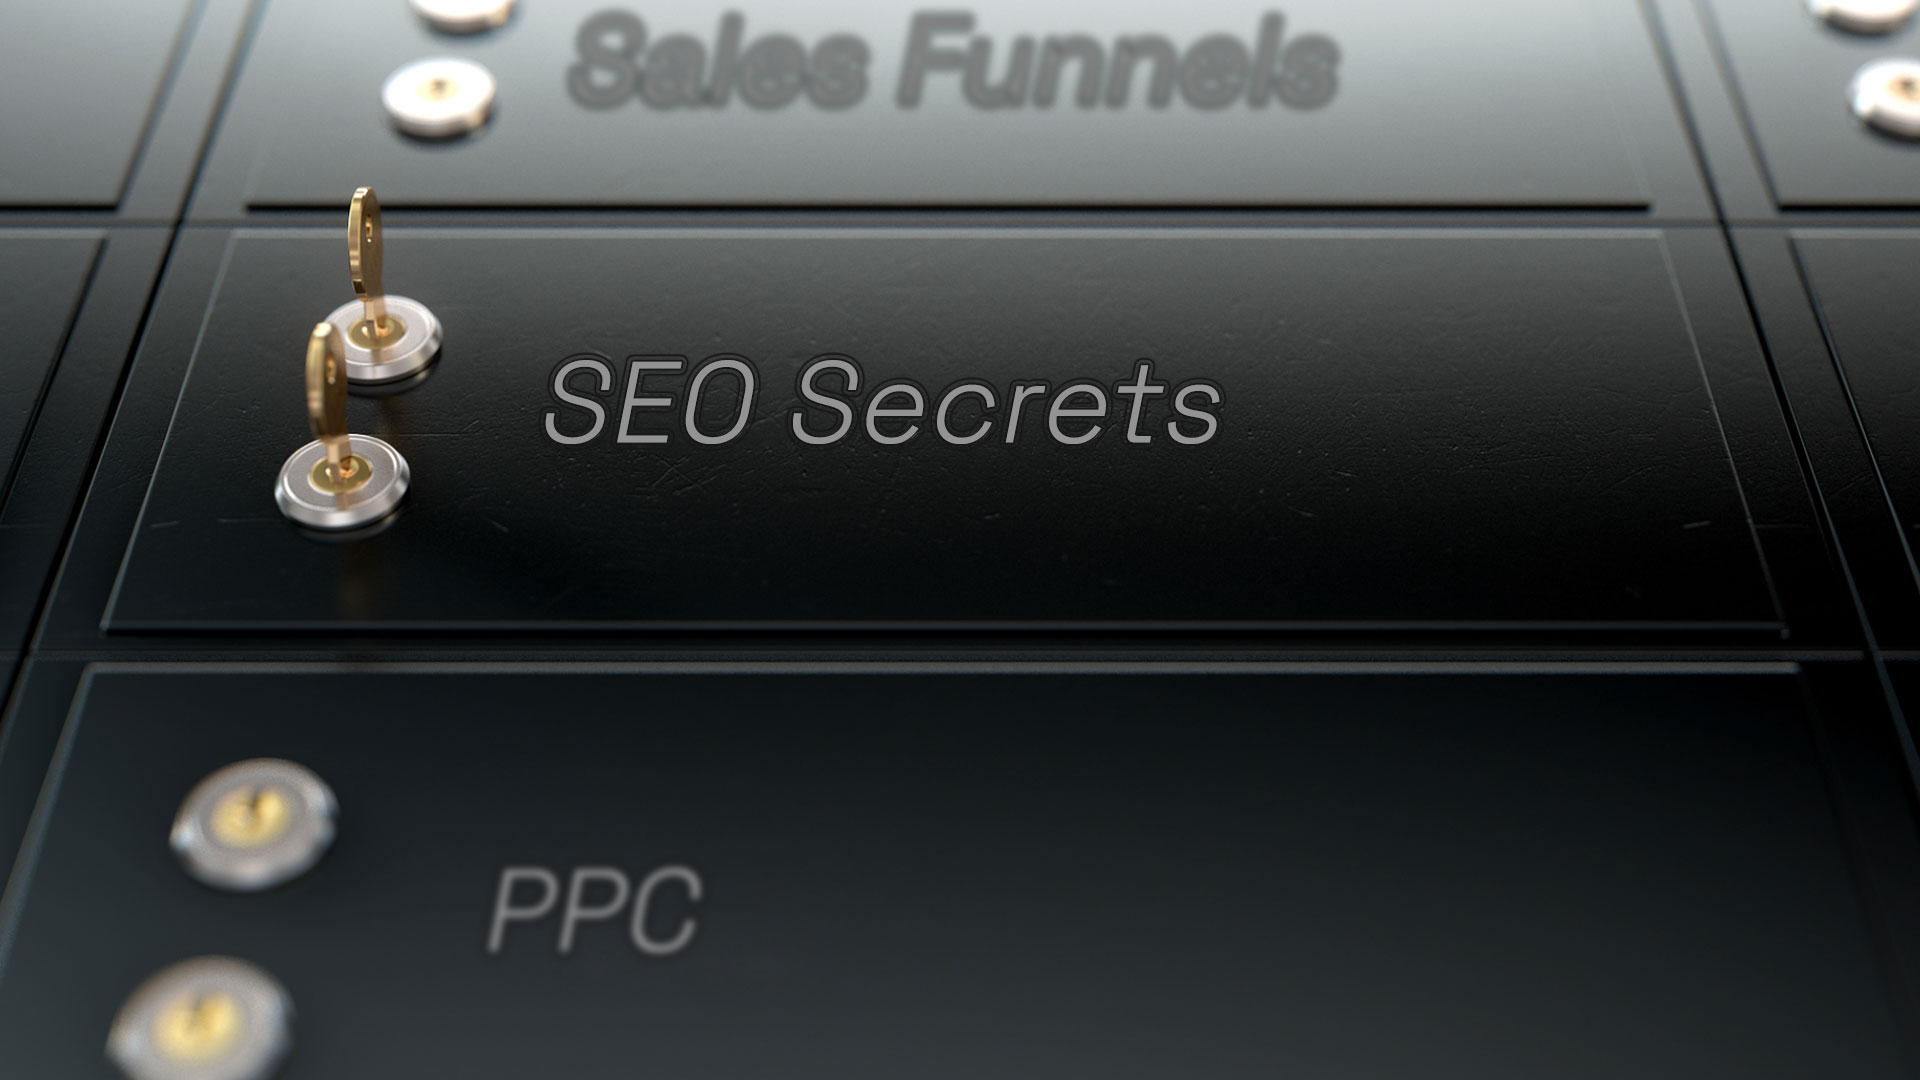 Safe Deposit Boxes Labeled SEO Secrets with keys in it and blurred out boxes labeled PPC and Sales Funnels